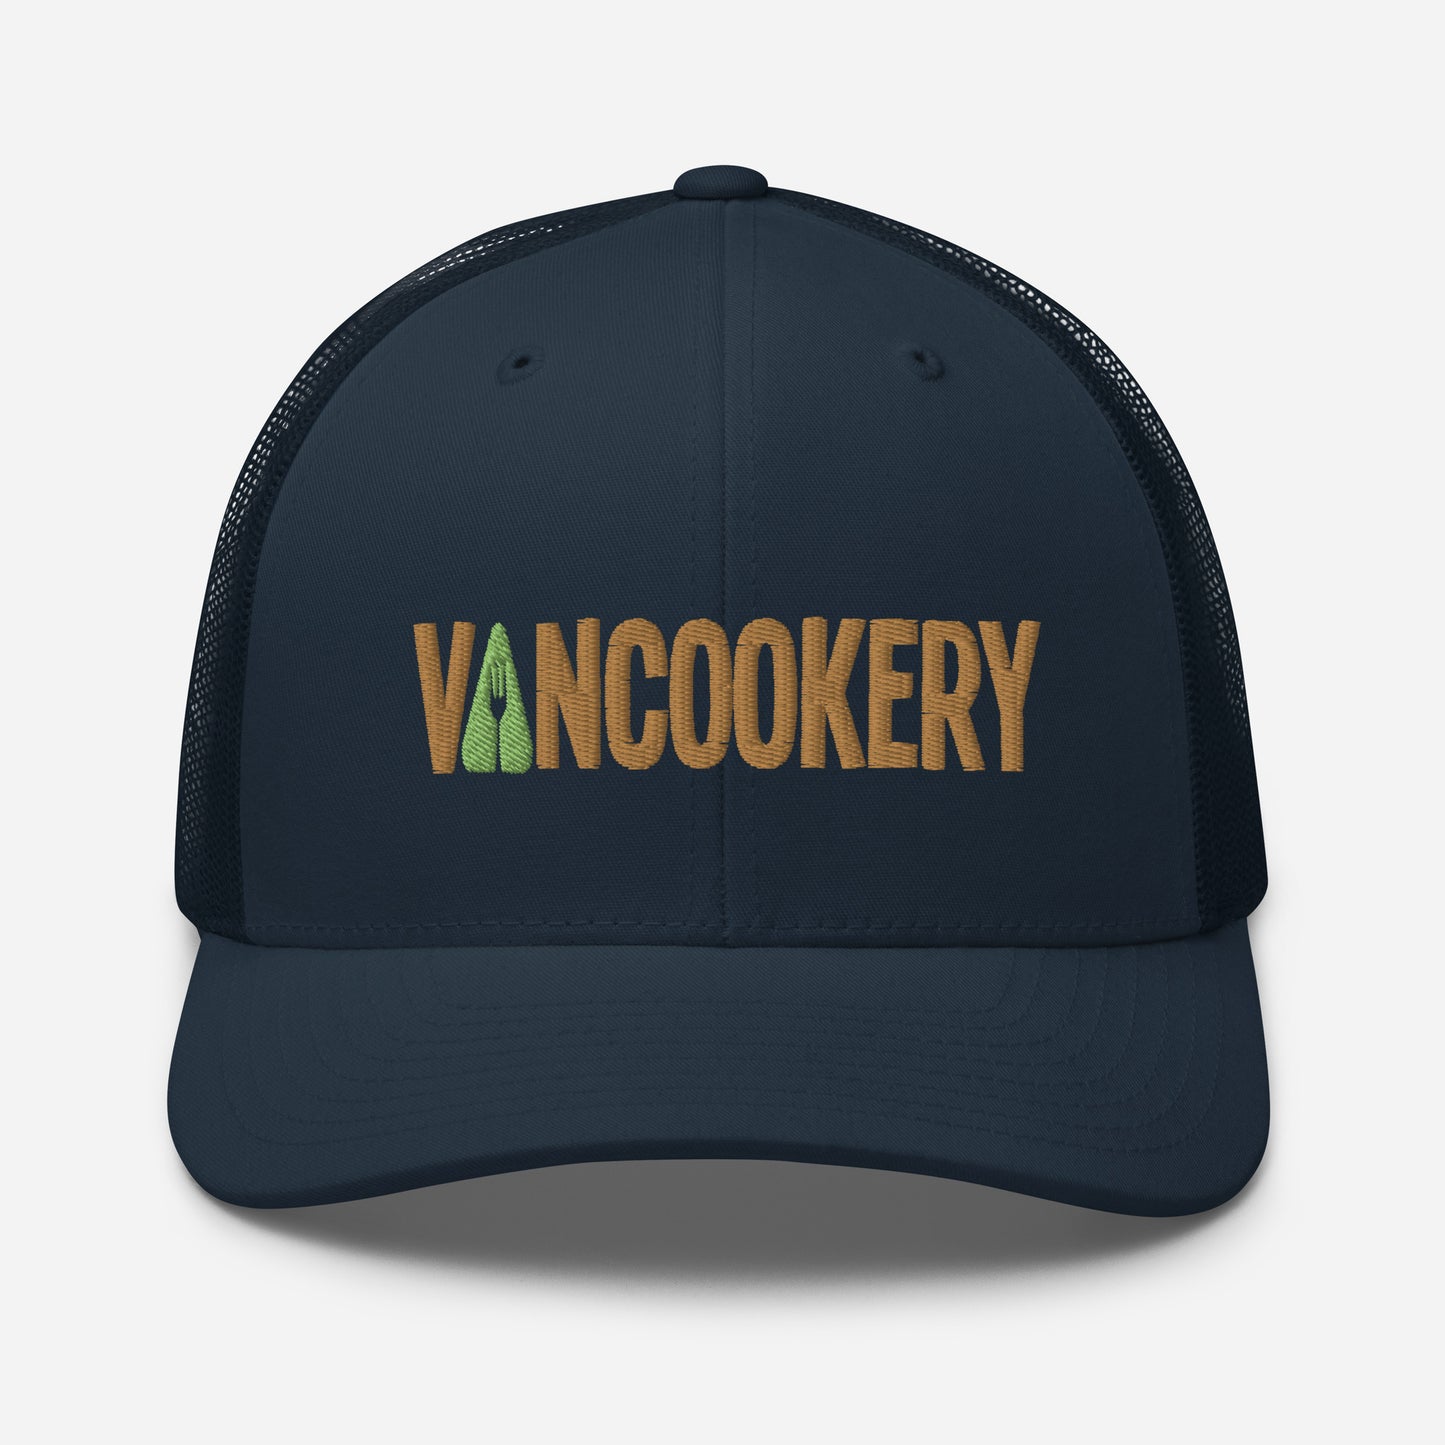 Vancookery Chef Hat: Because Your Hair Doesn't Belong in the Soup